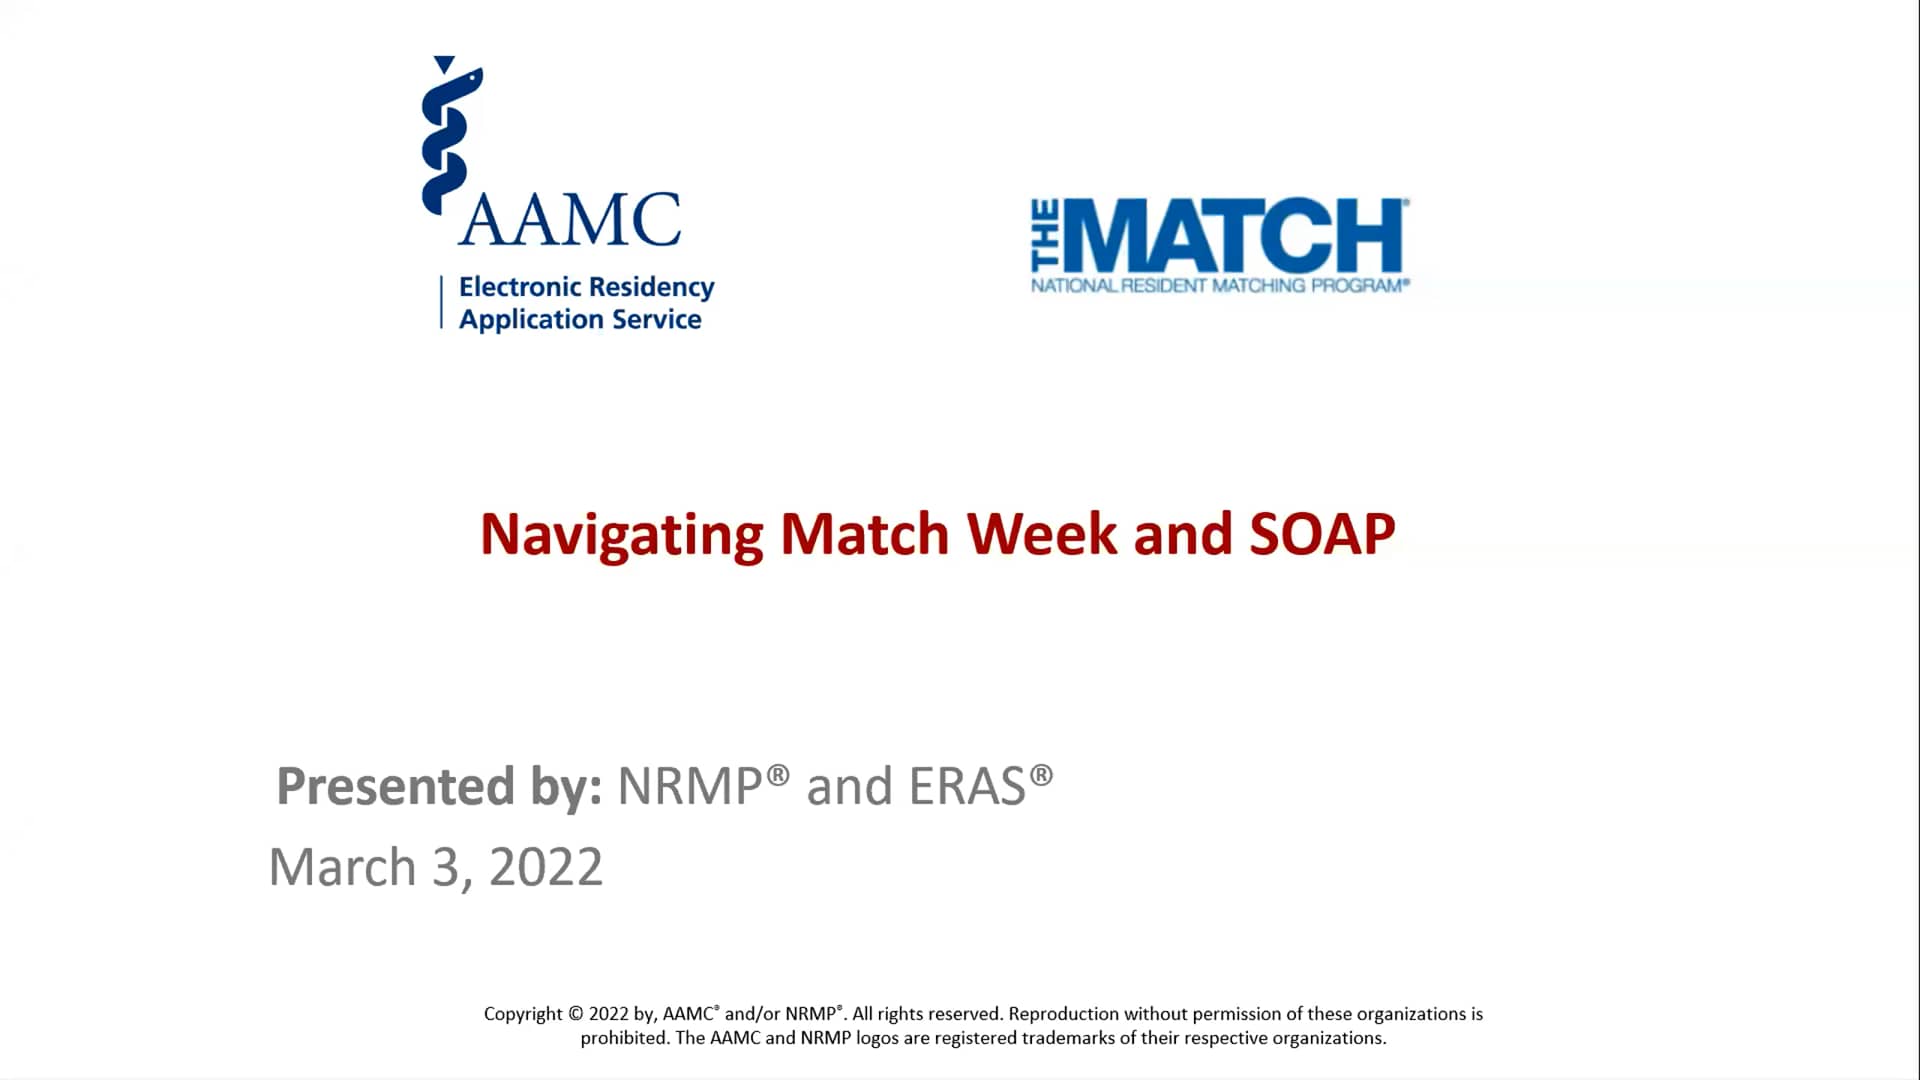 Joint NRMP and ERAS Webinar Navigating Match Week and SOAP on Vimeo